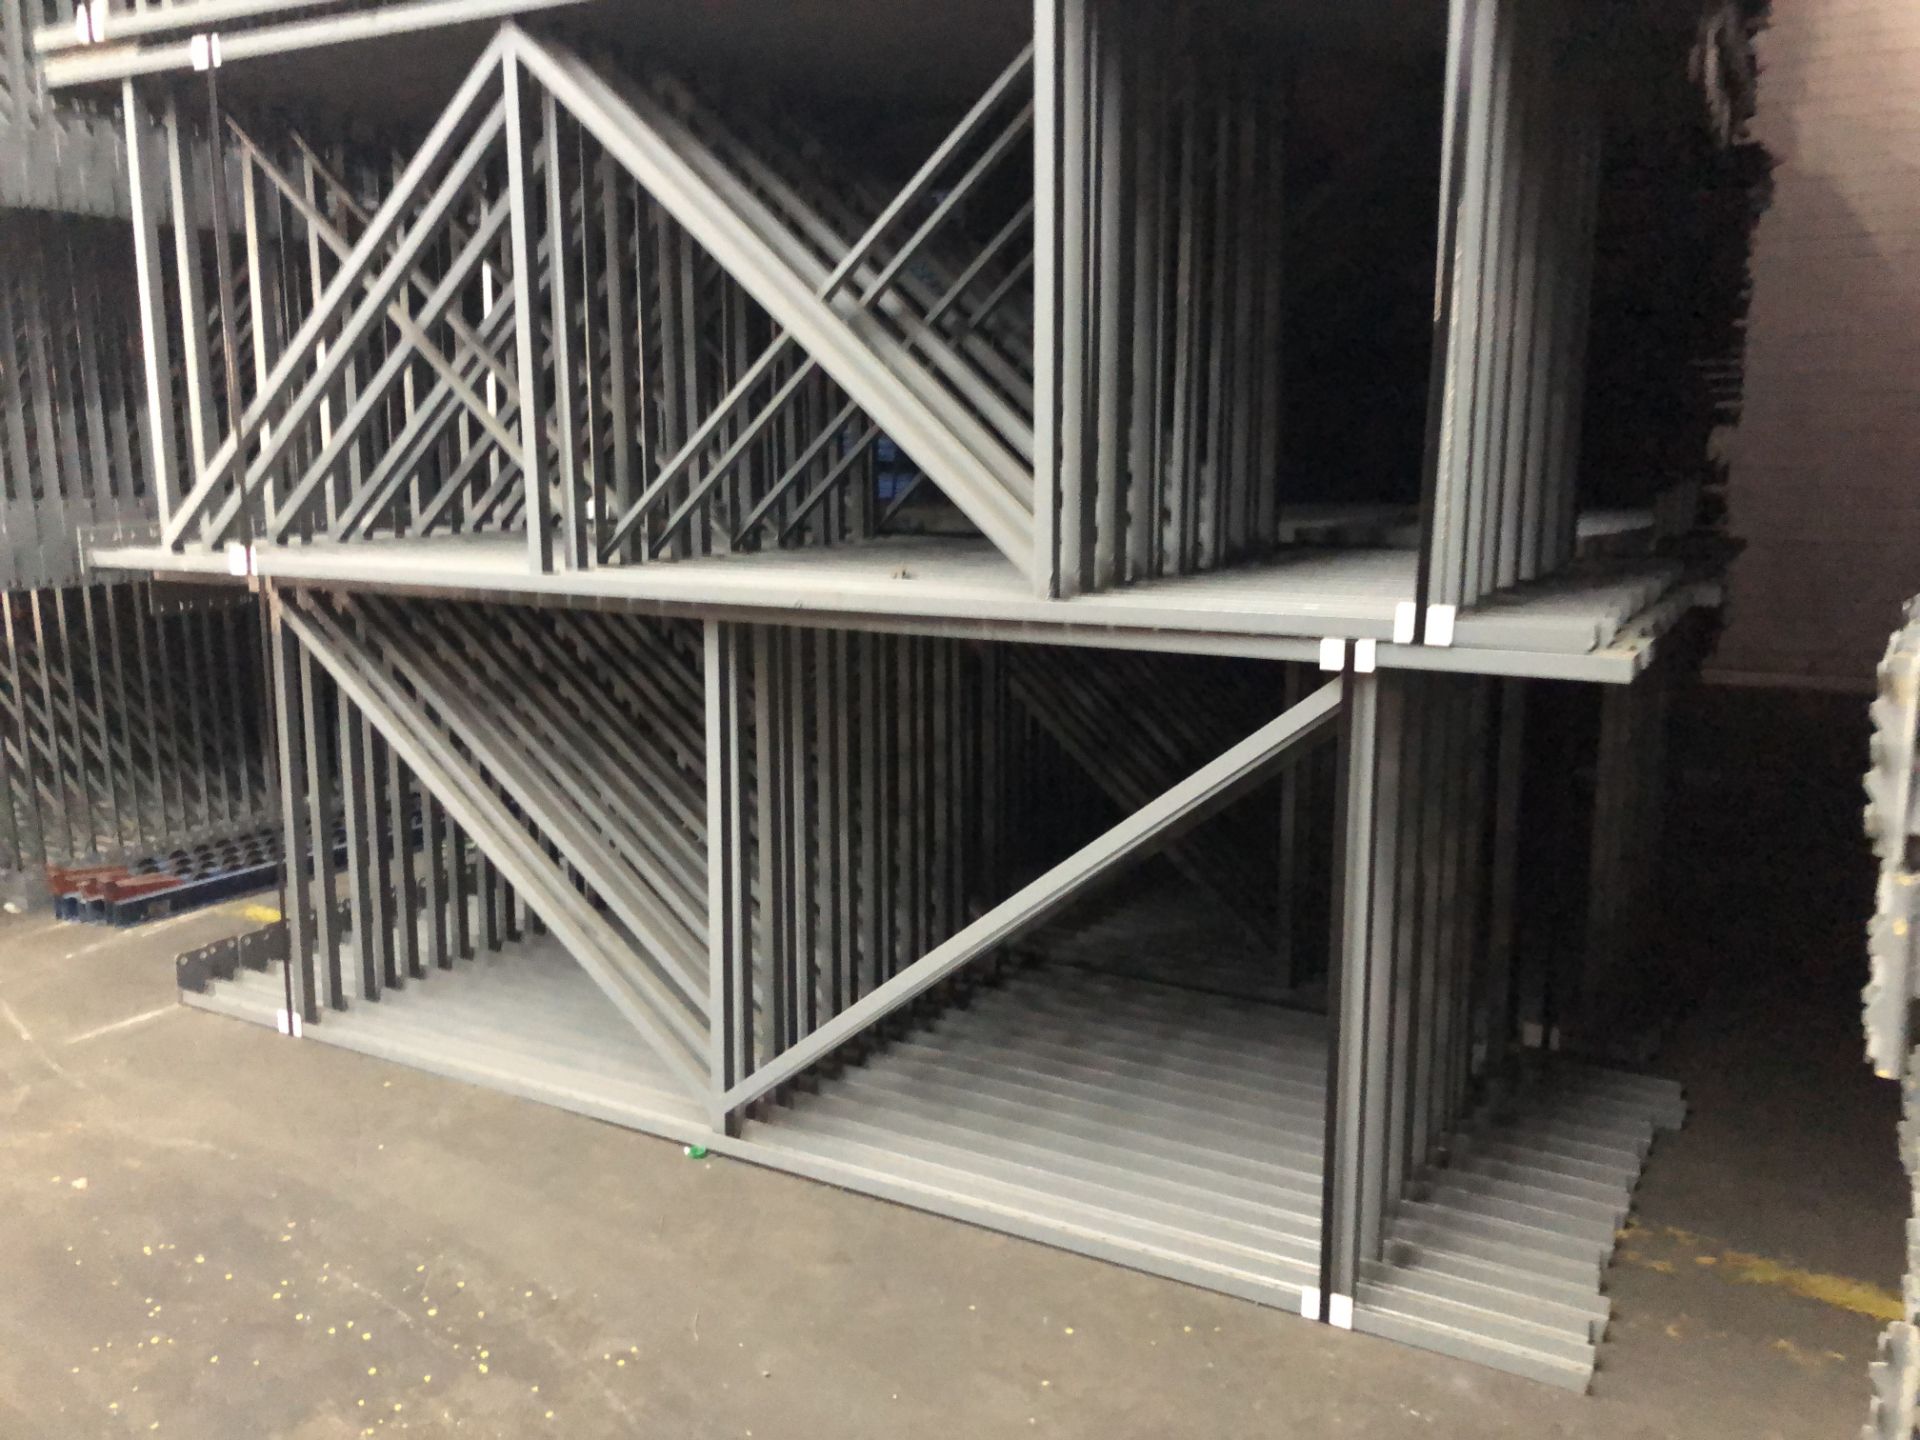 9 BAYS OF 10.5'H X 42"D X 102"L STRUCTURAL STYLE PALLET RACKS - Image 2 of 5